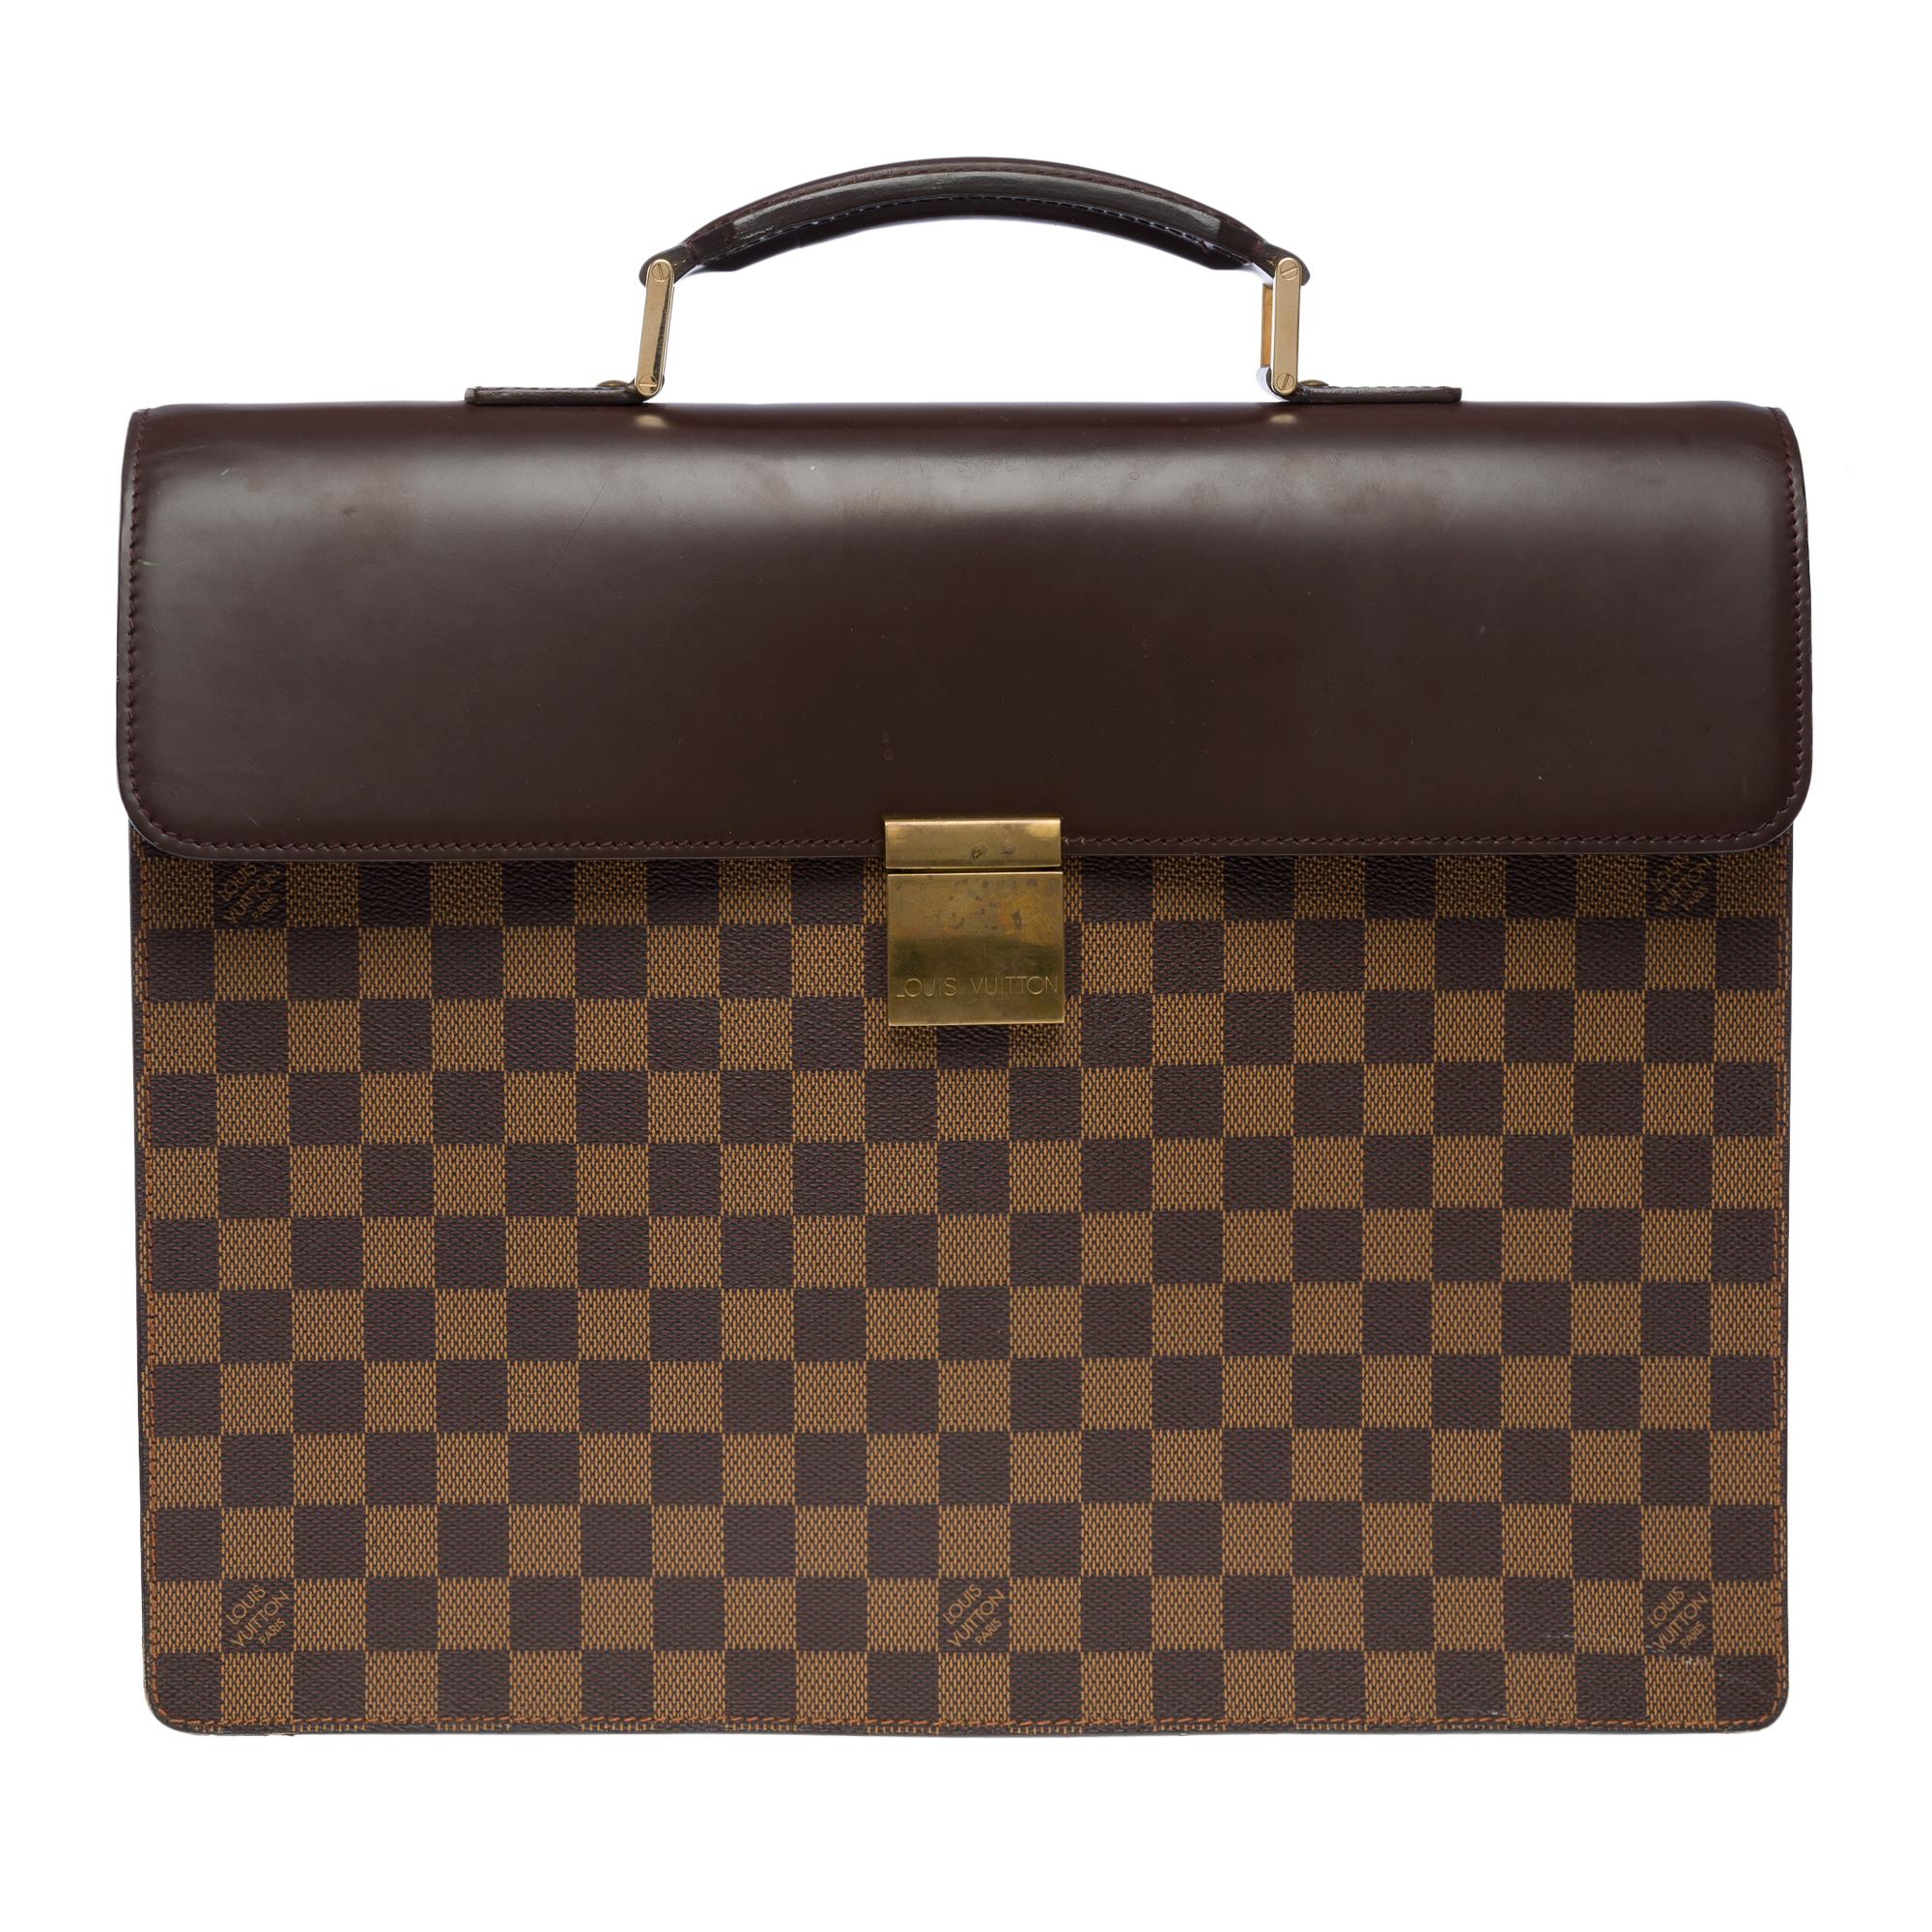 Very​ ​Chic​ ​Louis​ ​Vuitton​ ​Altona​ ​PM​ ​Briefcase​ ​in​ ​Ebony​ ​canvas​ ​and​ ​brown​ ​leather,​ ​golden​ ​brass​ ​trim,​ ​a​ ​brown​ ​leather​ ​handle​ ​for​ ​a​ ​hand​ ​carry​ ​

Closure​ ​with​ ​flap,​ ​clasp​ ​signed​ ​Louis​ ​Vuitton
A​